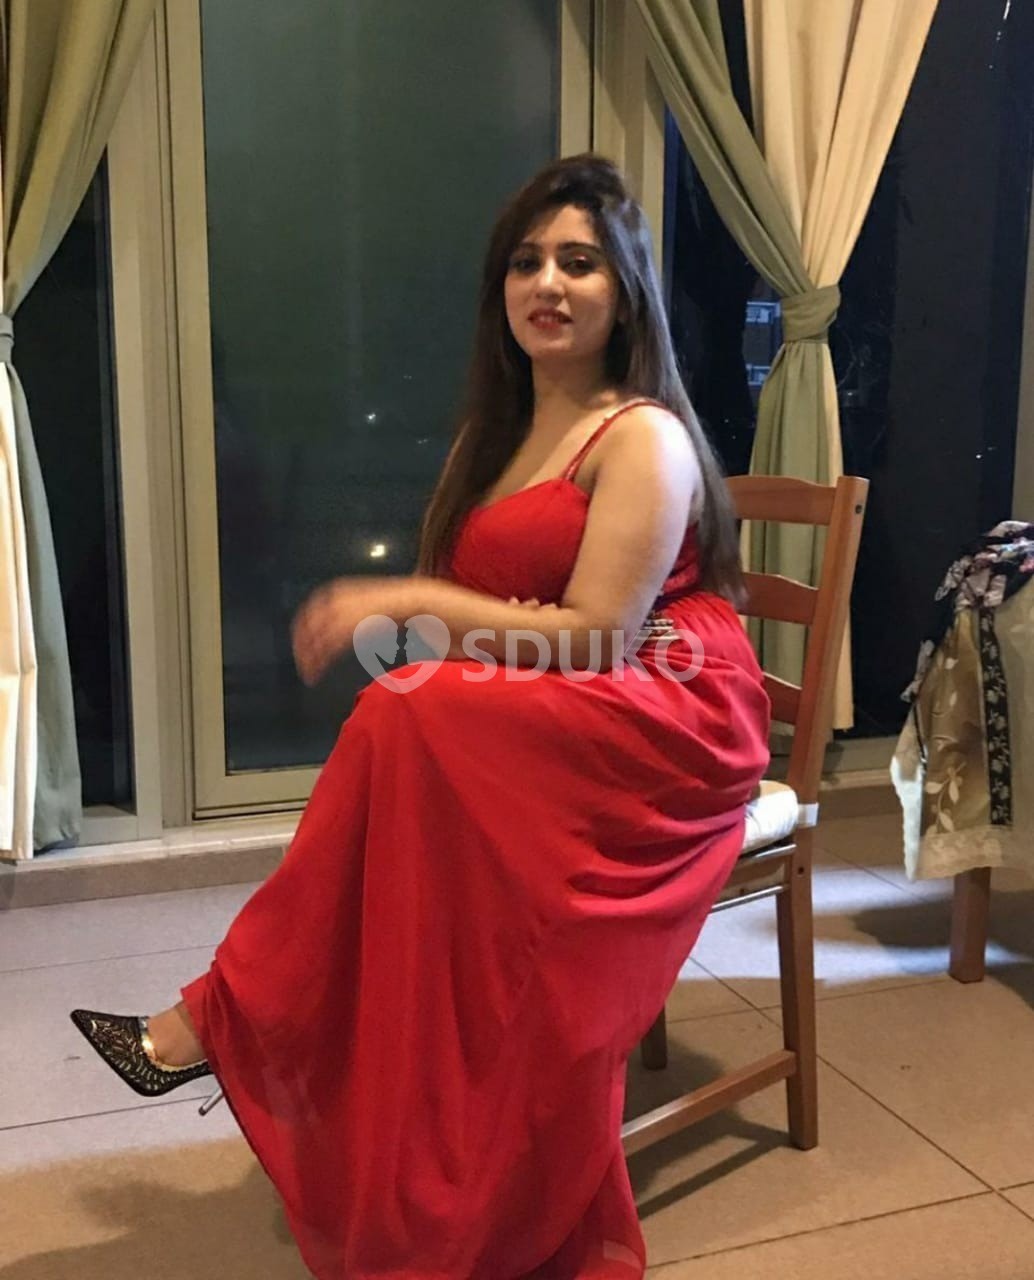 Bangalore vip genuine in ⭐⭐⭐💯 Royal Eskort Sarvice Safe and secure service low price High profile girls ava100%